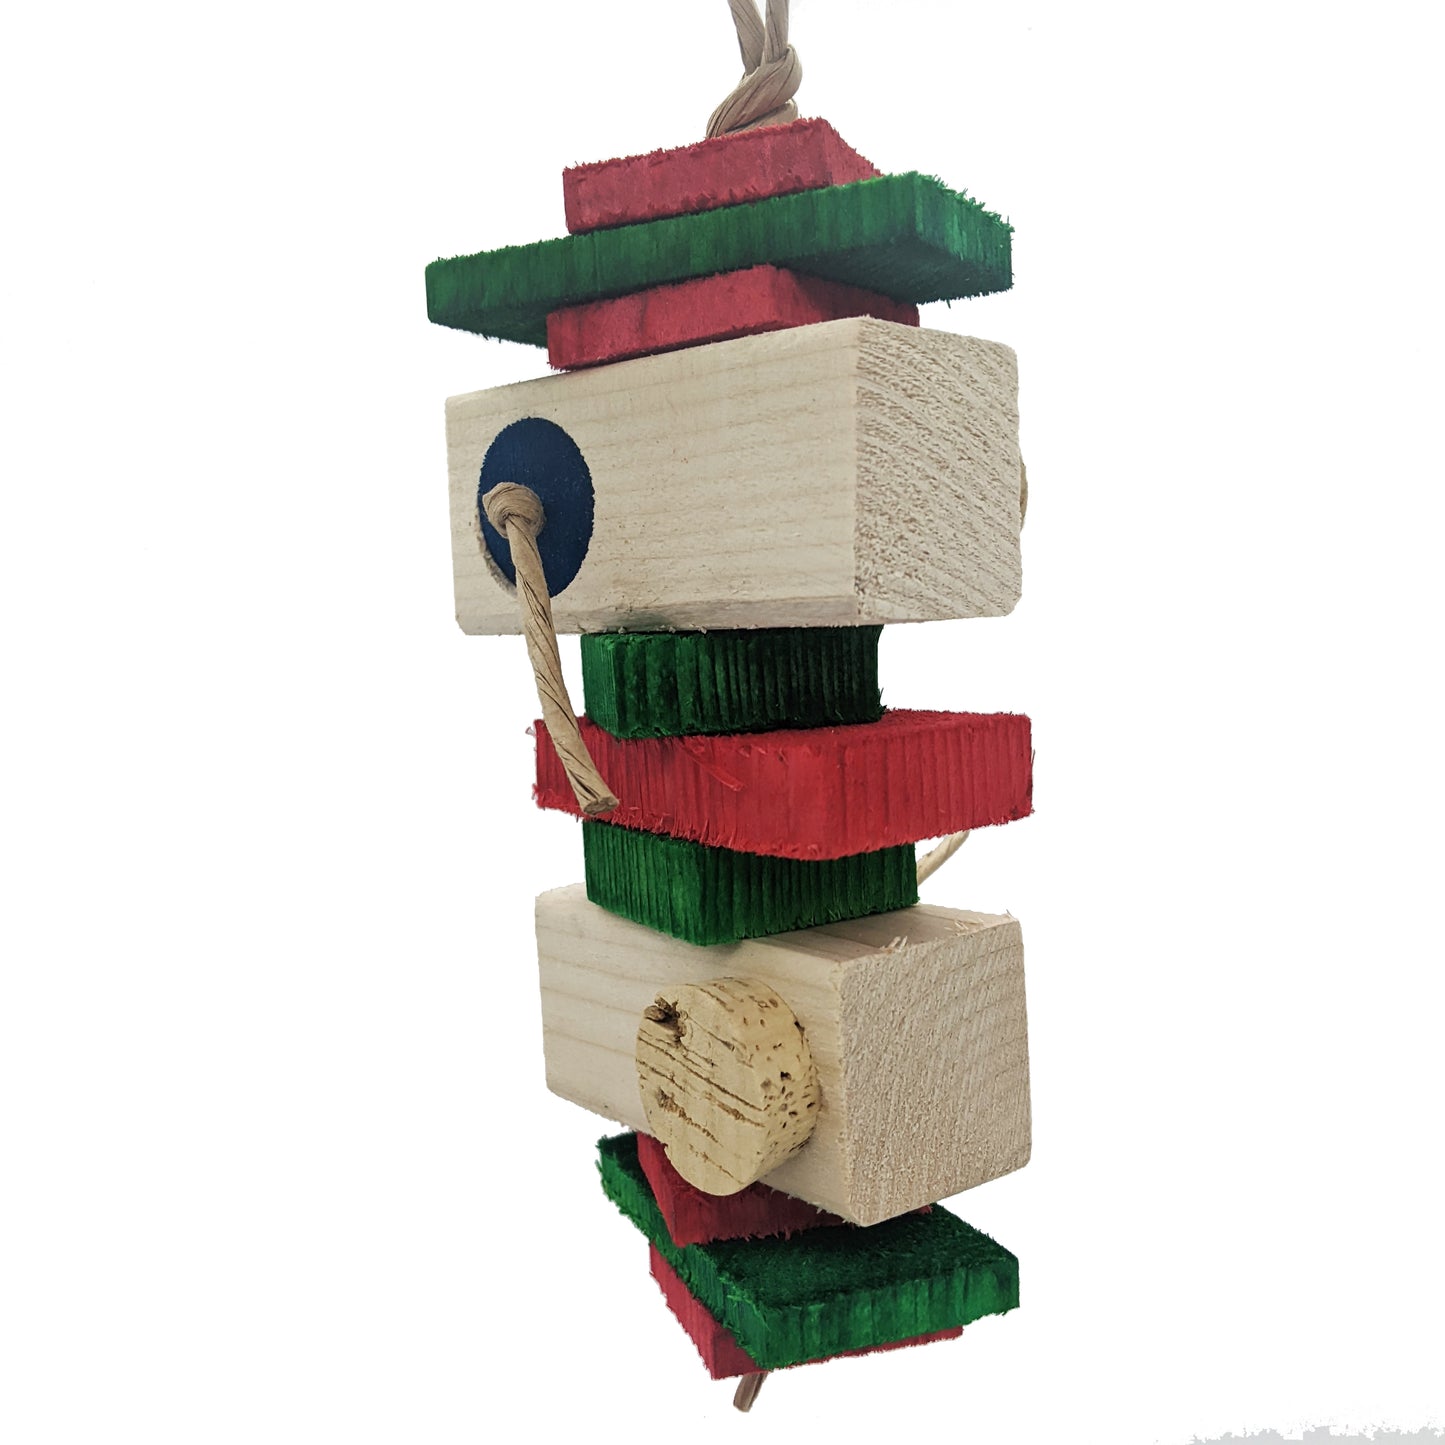 A pine foraging toy for birds. Contains quarter inch and half inch thick pine slats measuring 3 inches and 1.5 inches wide. Also has two blocks measuring 3 inches wide, by 1.5 by 1.5. Each of these blocks has two 1 inch holes drilled into it on alternate sides. Two are plugged with hardwood discs with rope pulls, and two are plugged with natural cork stoppers. 